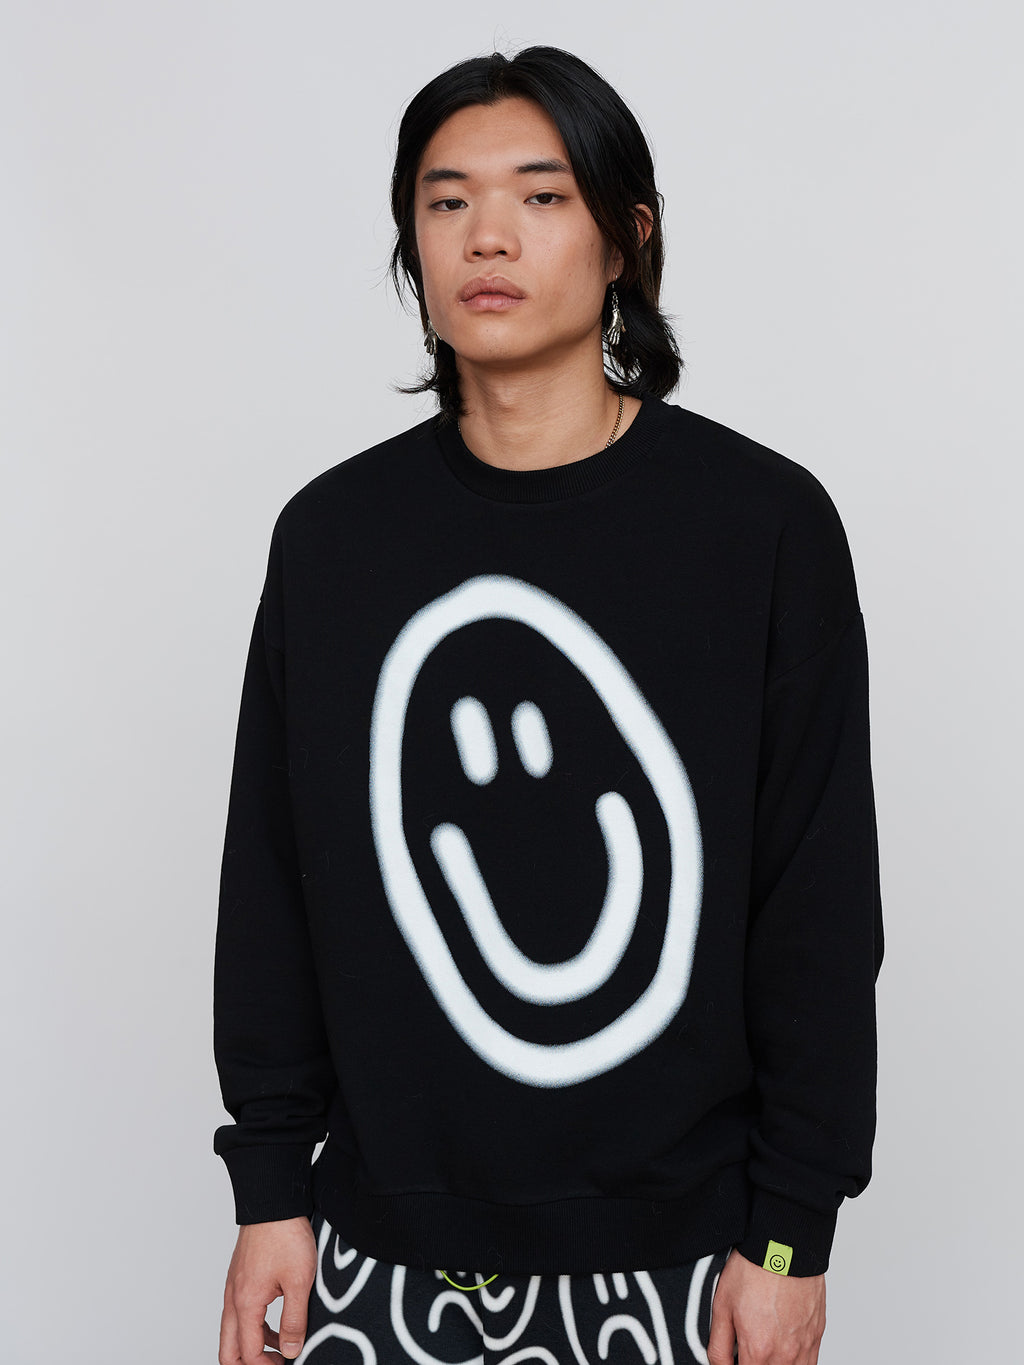  collection-men-landing, collection-mens-sweatshirts, collection-men-new-in-1, collection-squish-face